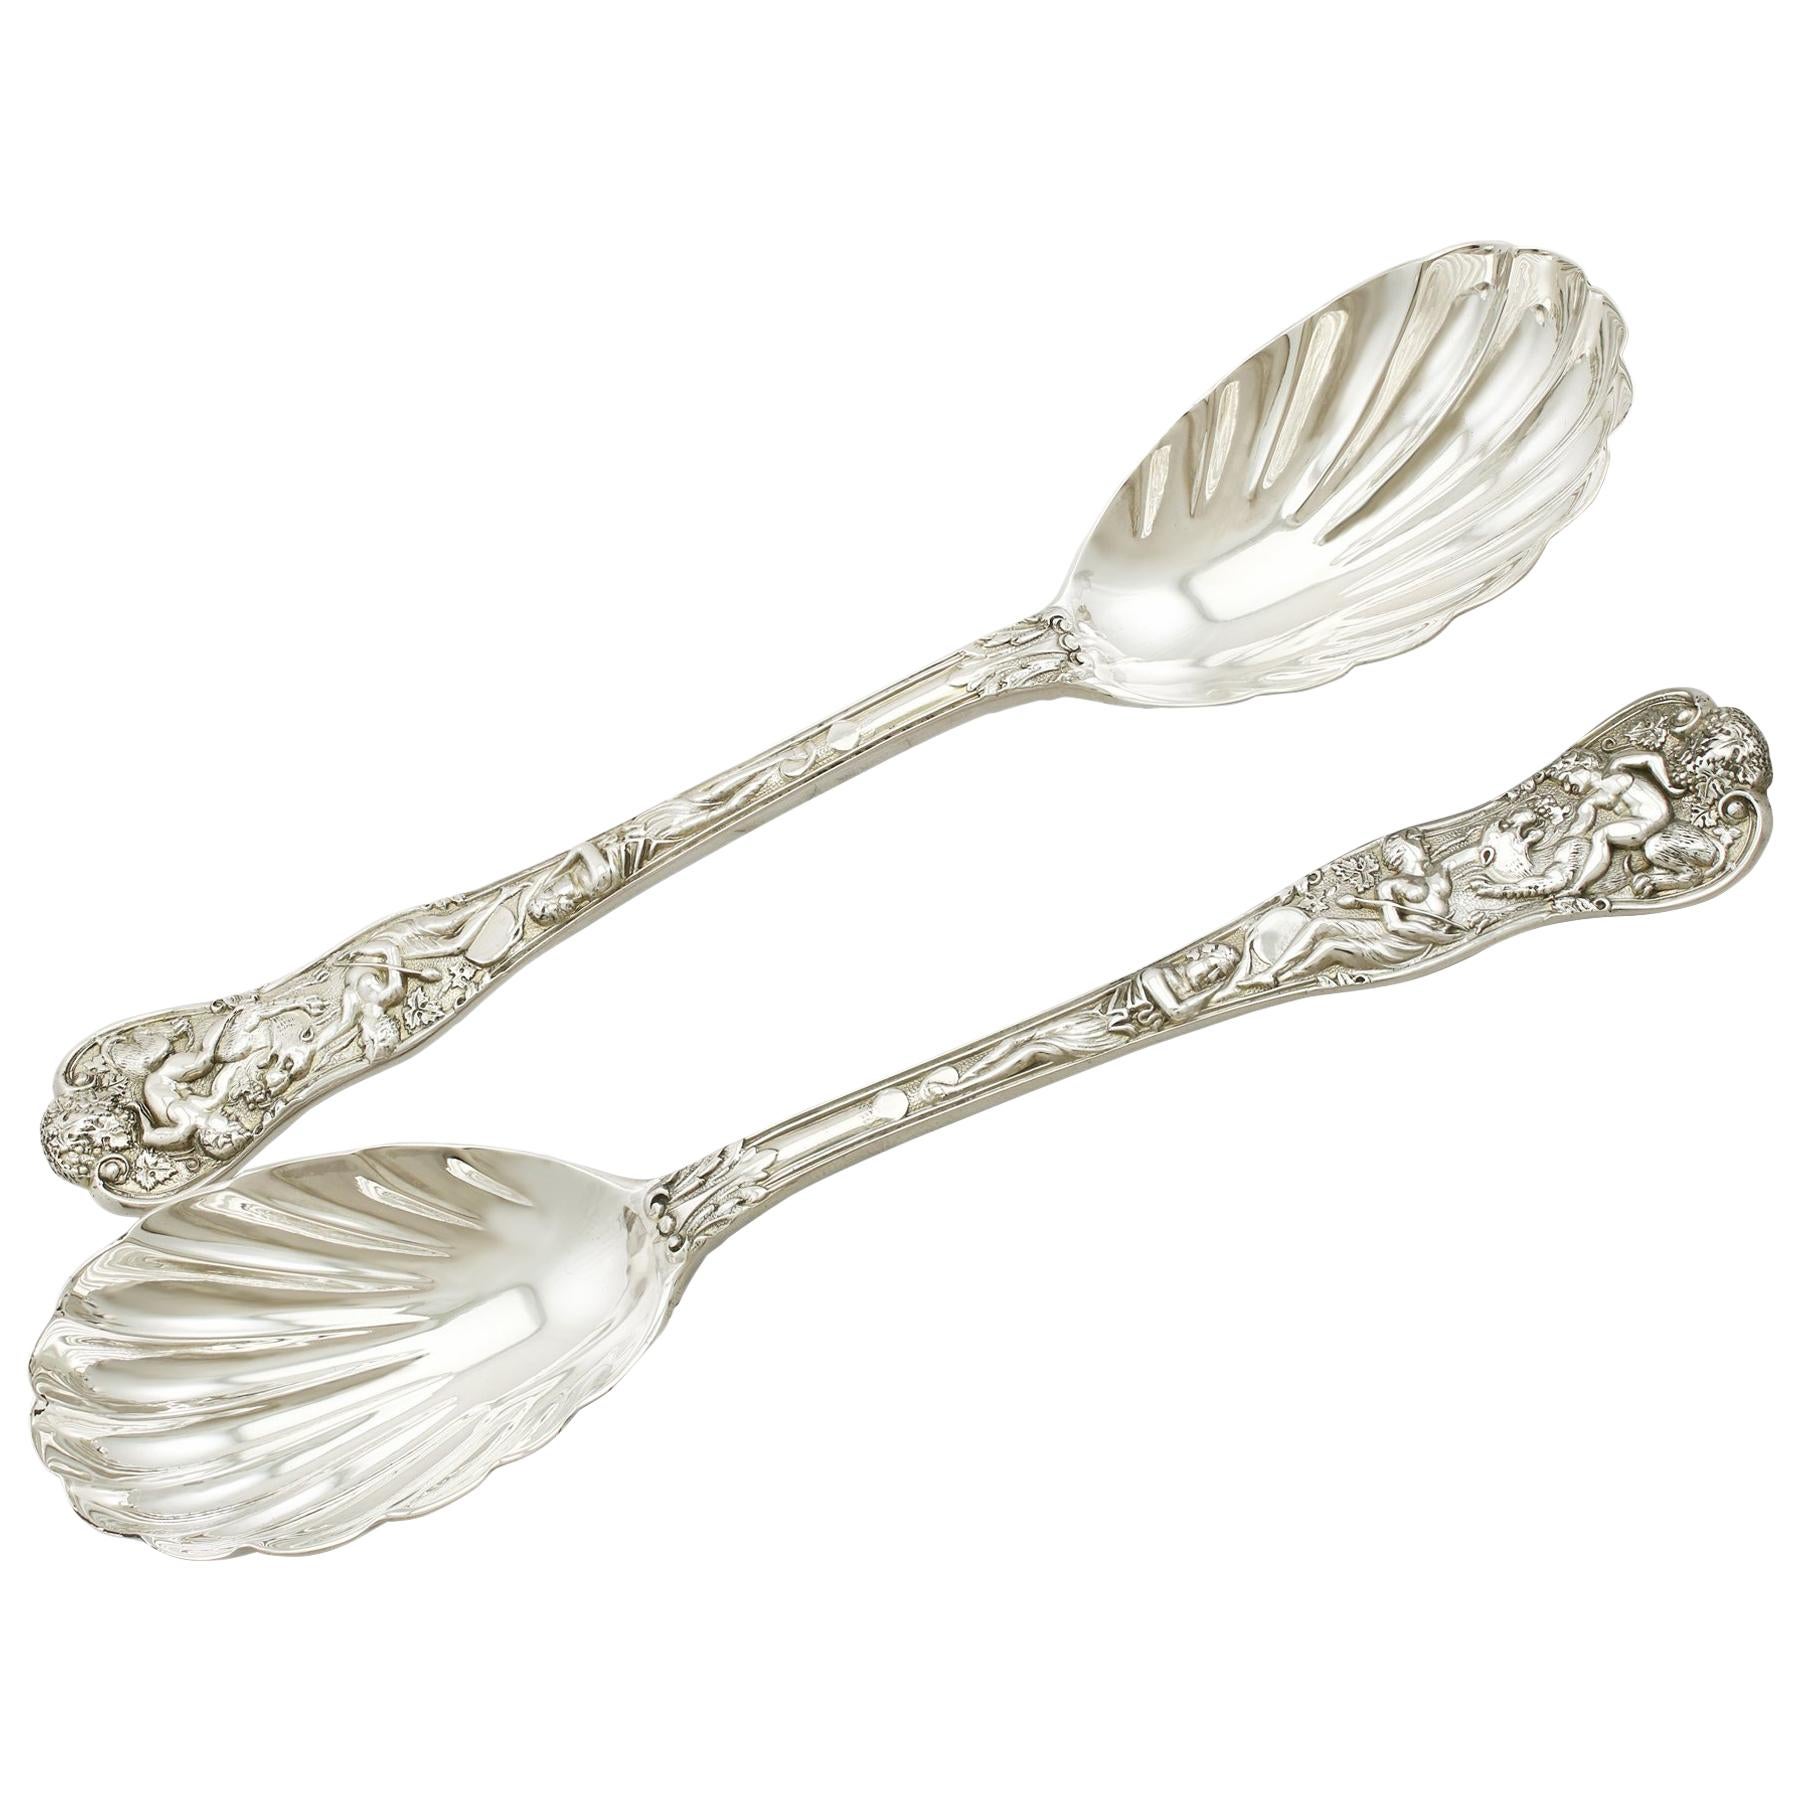 Antique 1890s Victorian Sterling Silver Fruit Serving Spoons